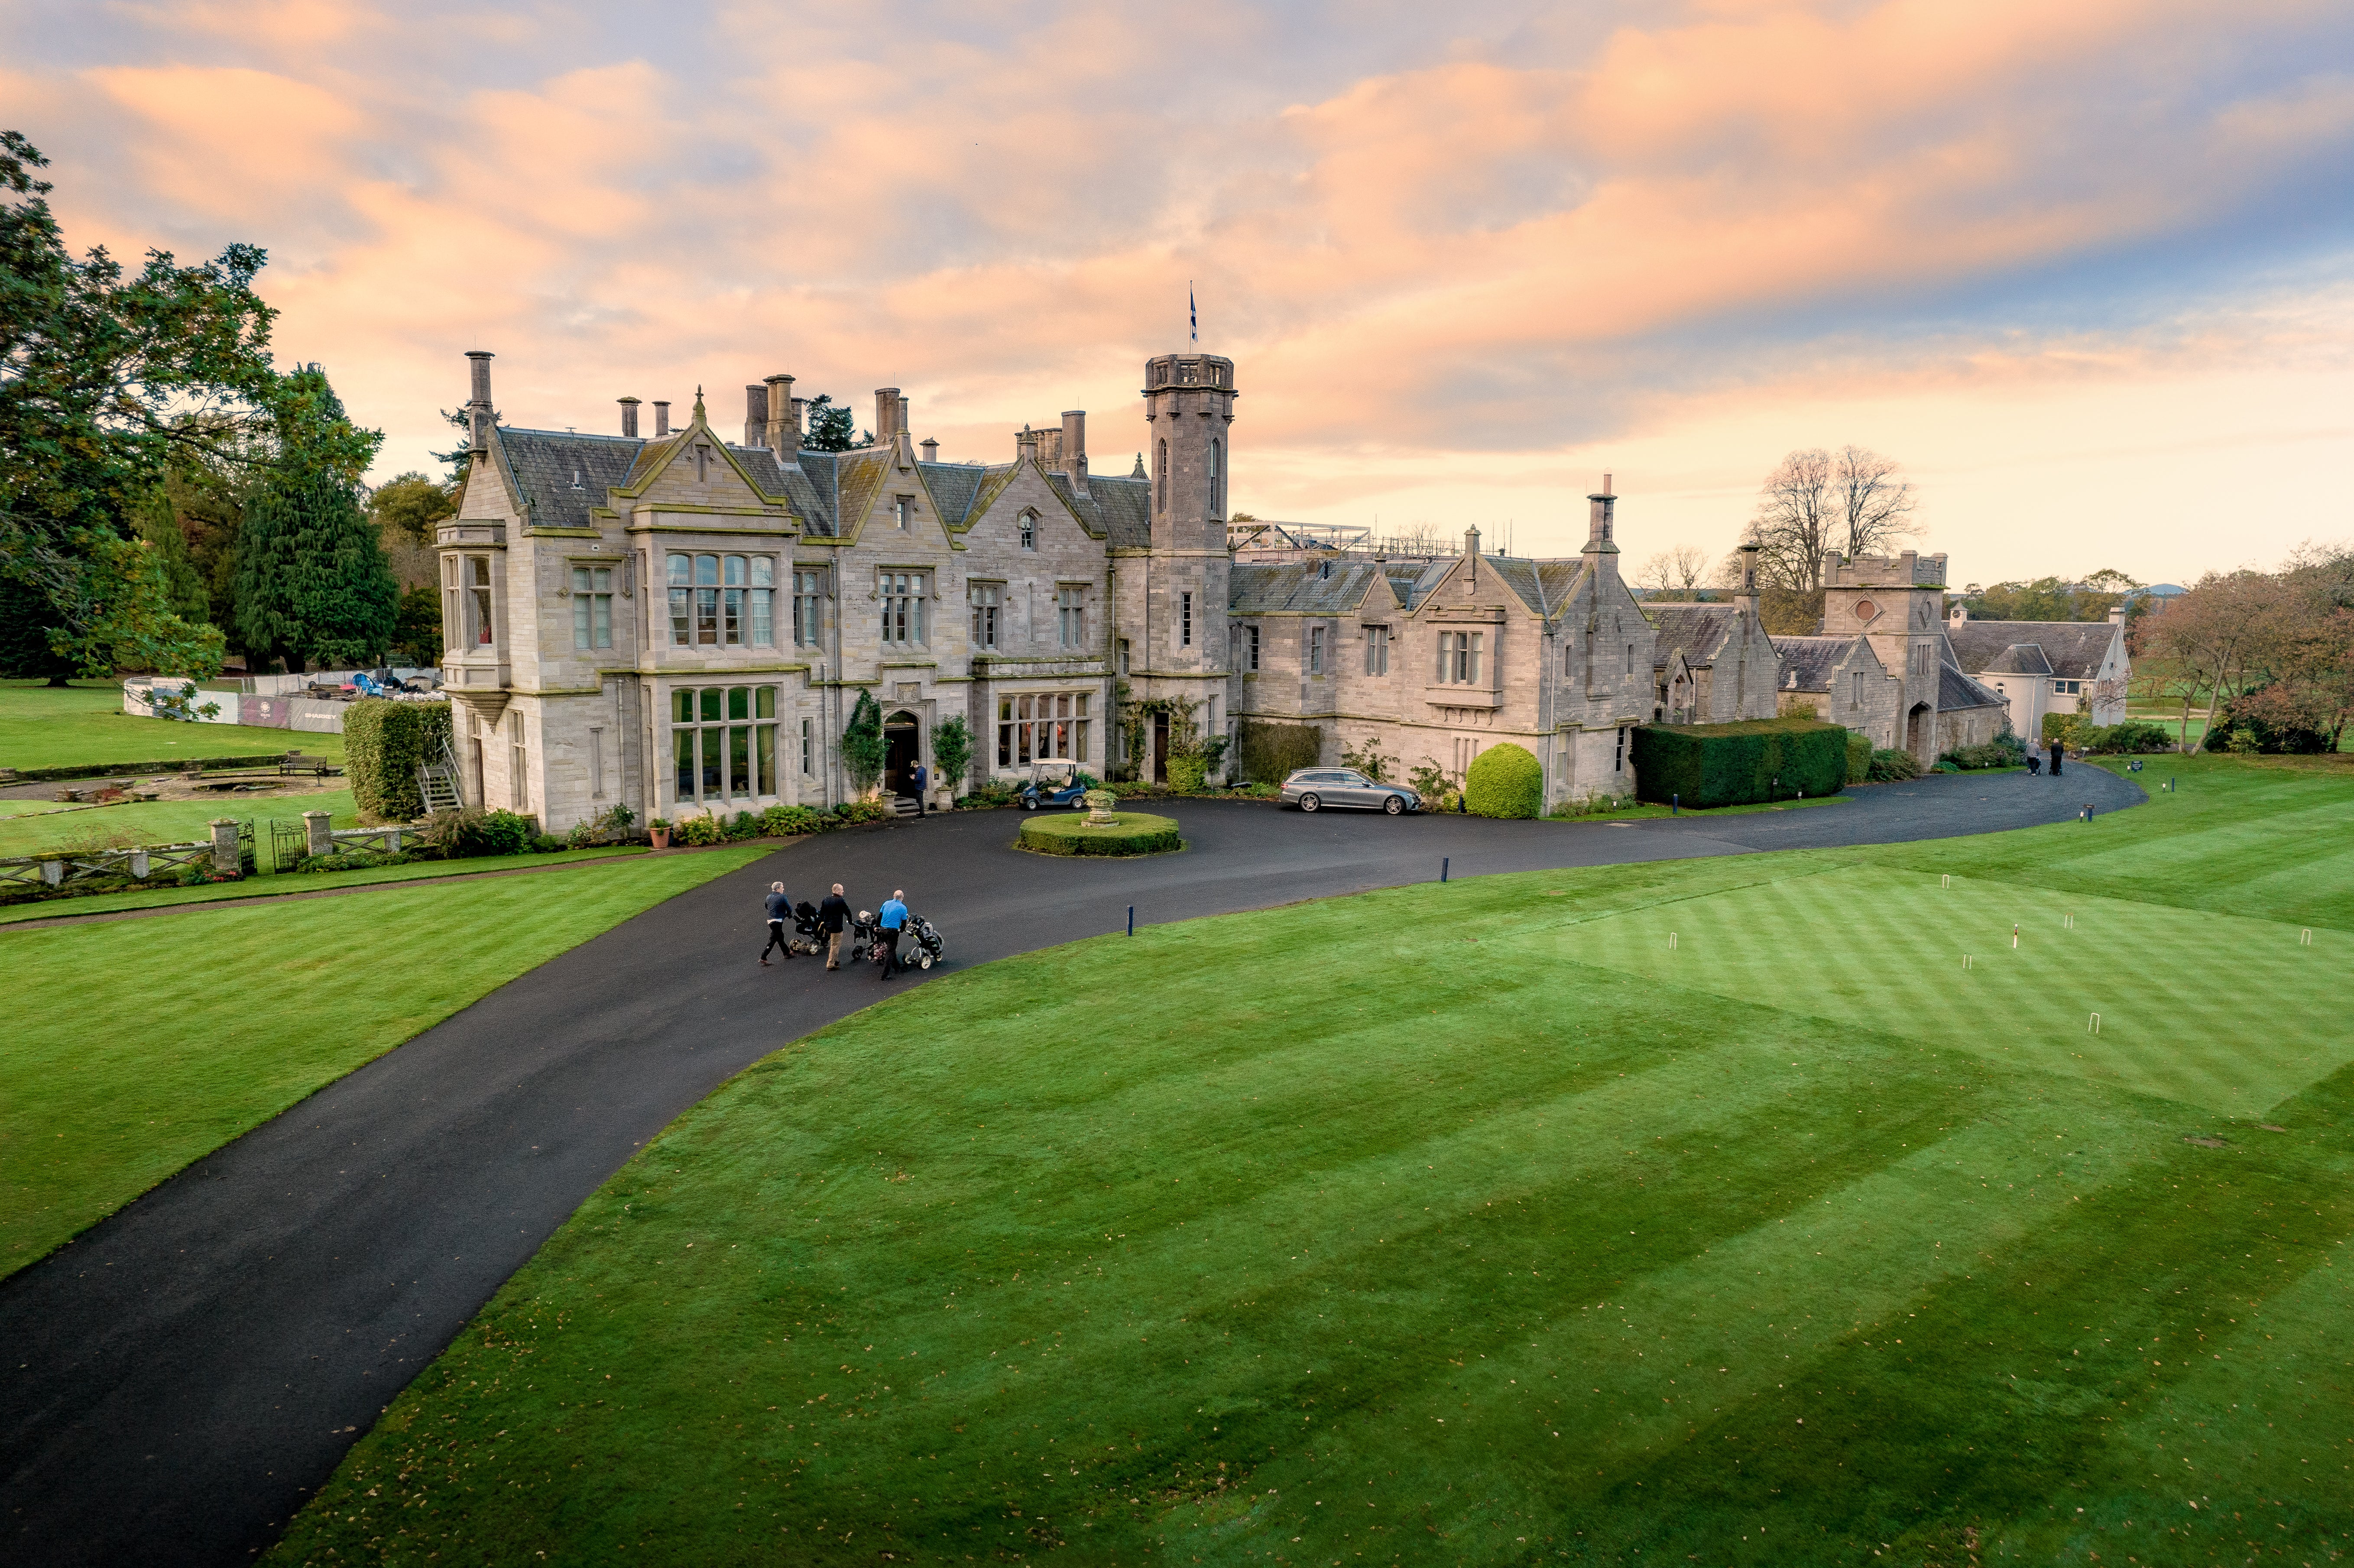 See in the New Year with a Scottish piper, clay pigeon shooting, archery and falconry